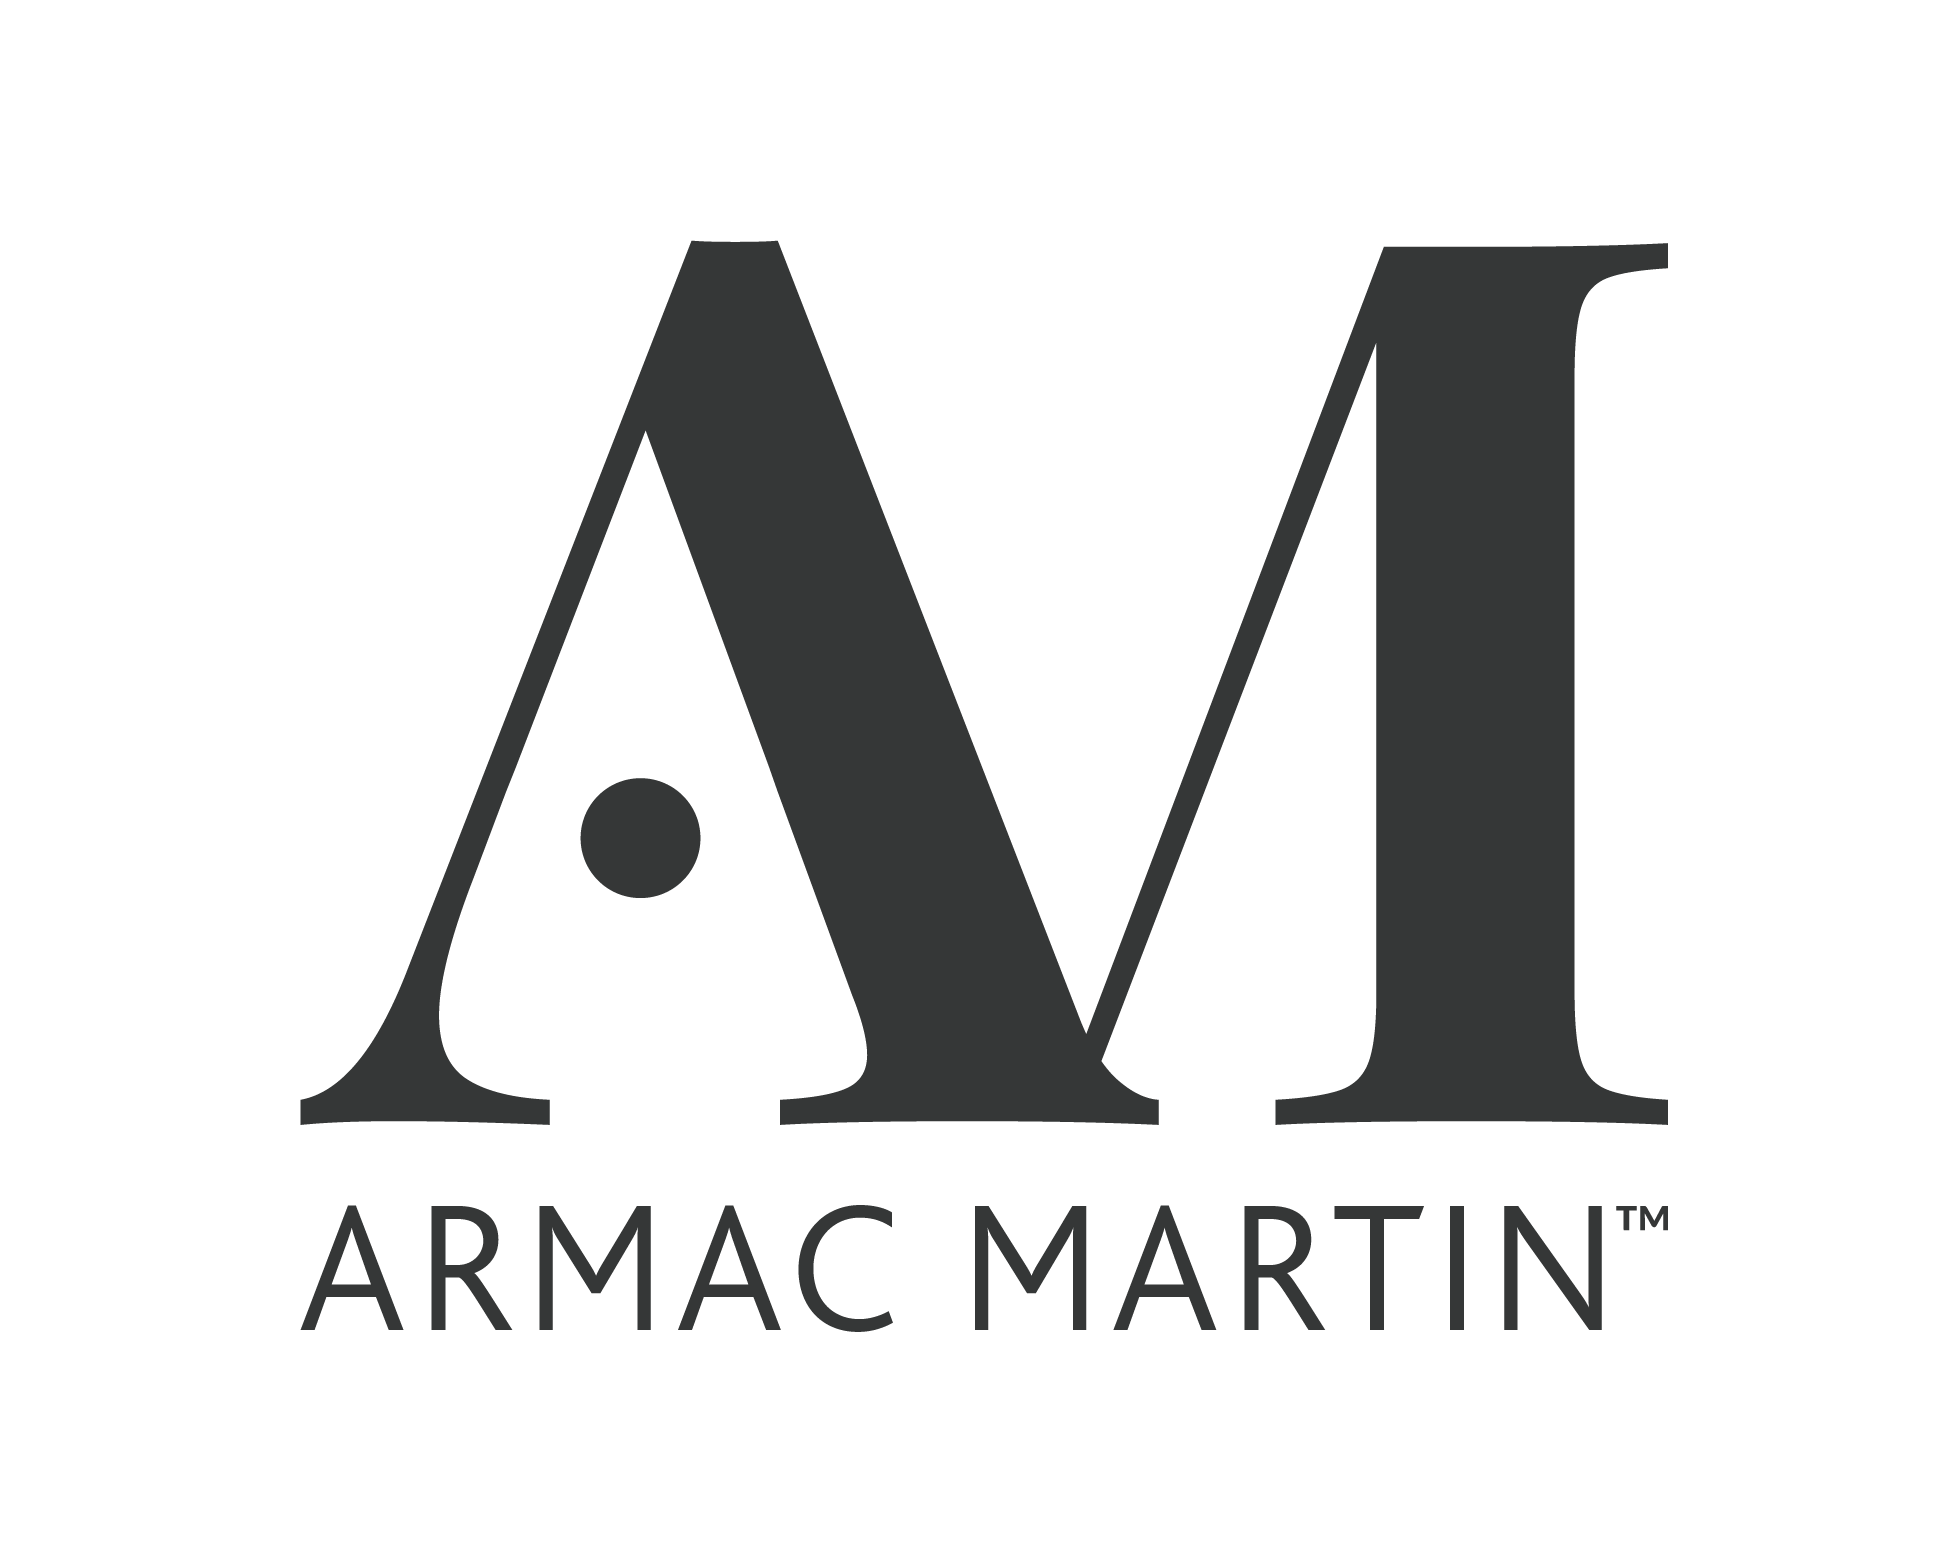 Polished Brass Unlacquered : Finish in Focus, Armac Martin